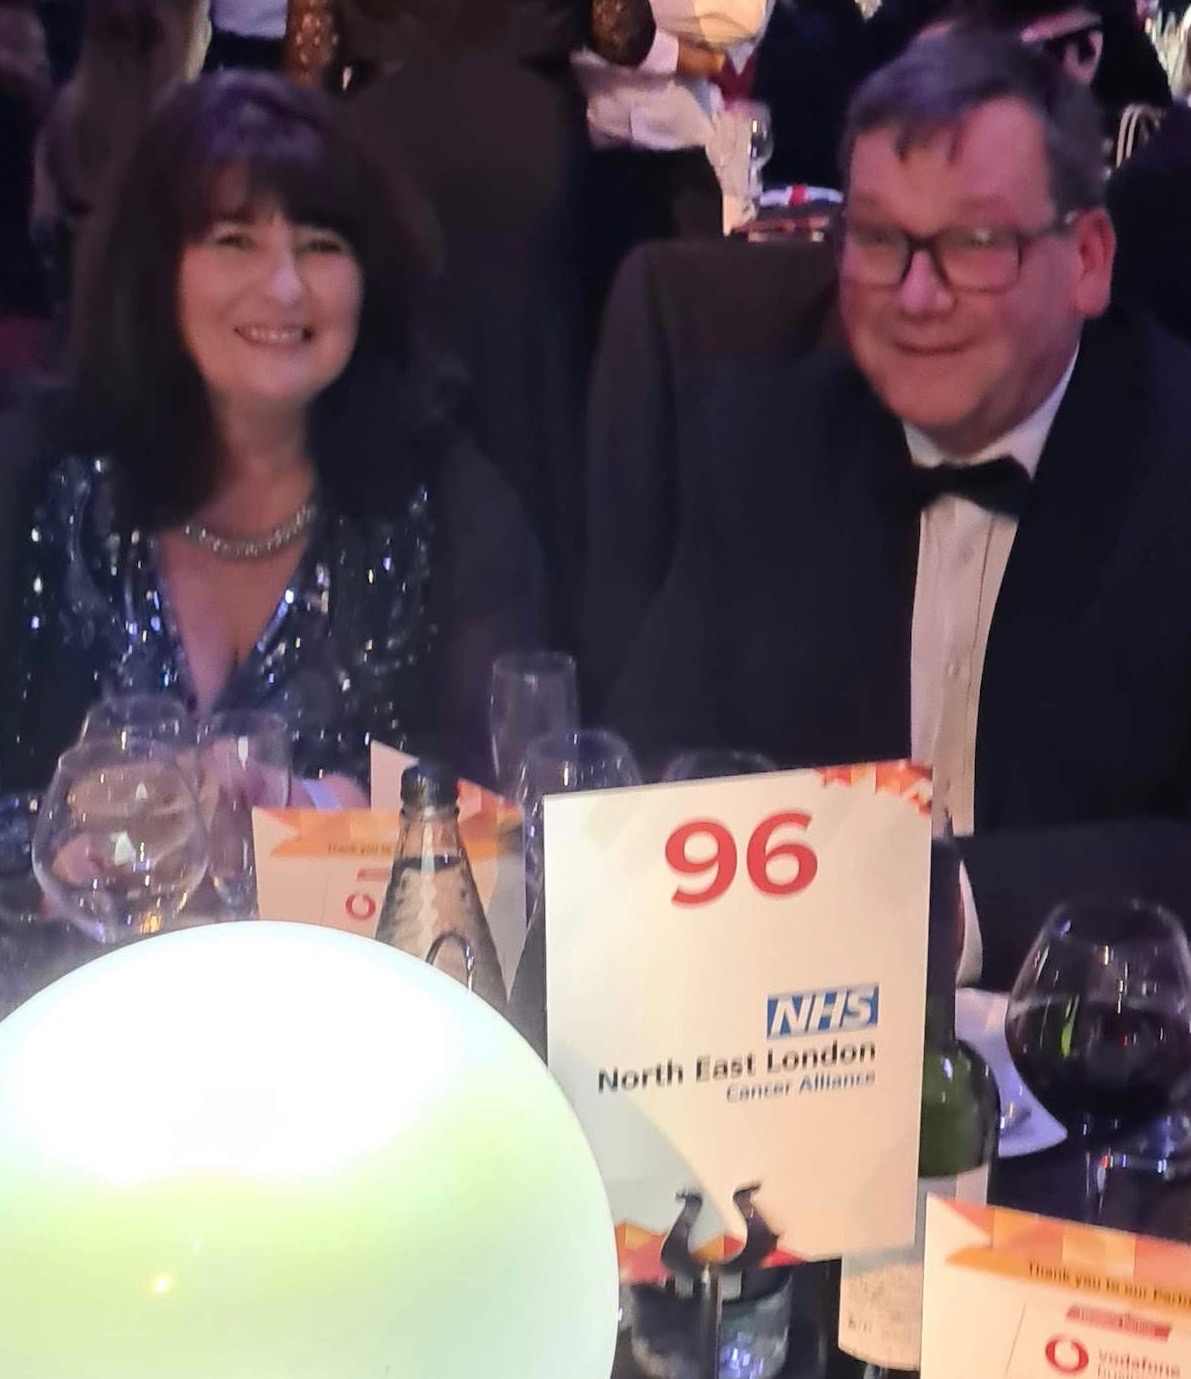 A man and a woman are dressed smartly and are sitting at an awards event dinner table. On the table is a sign which has the number 96 on it and the words North East London Cancer Alliance